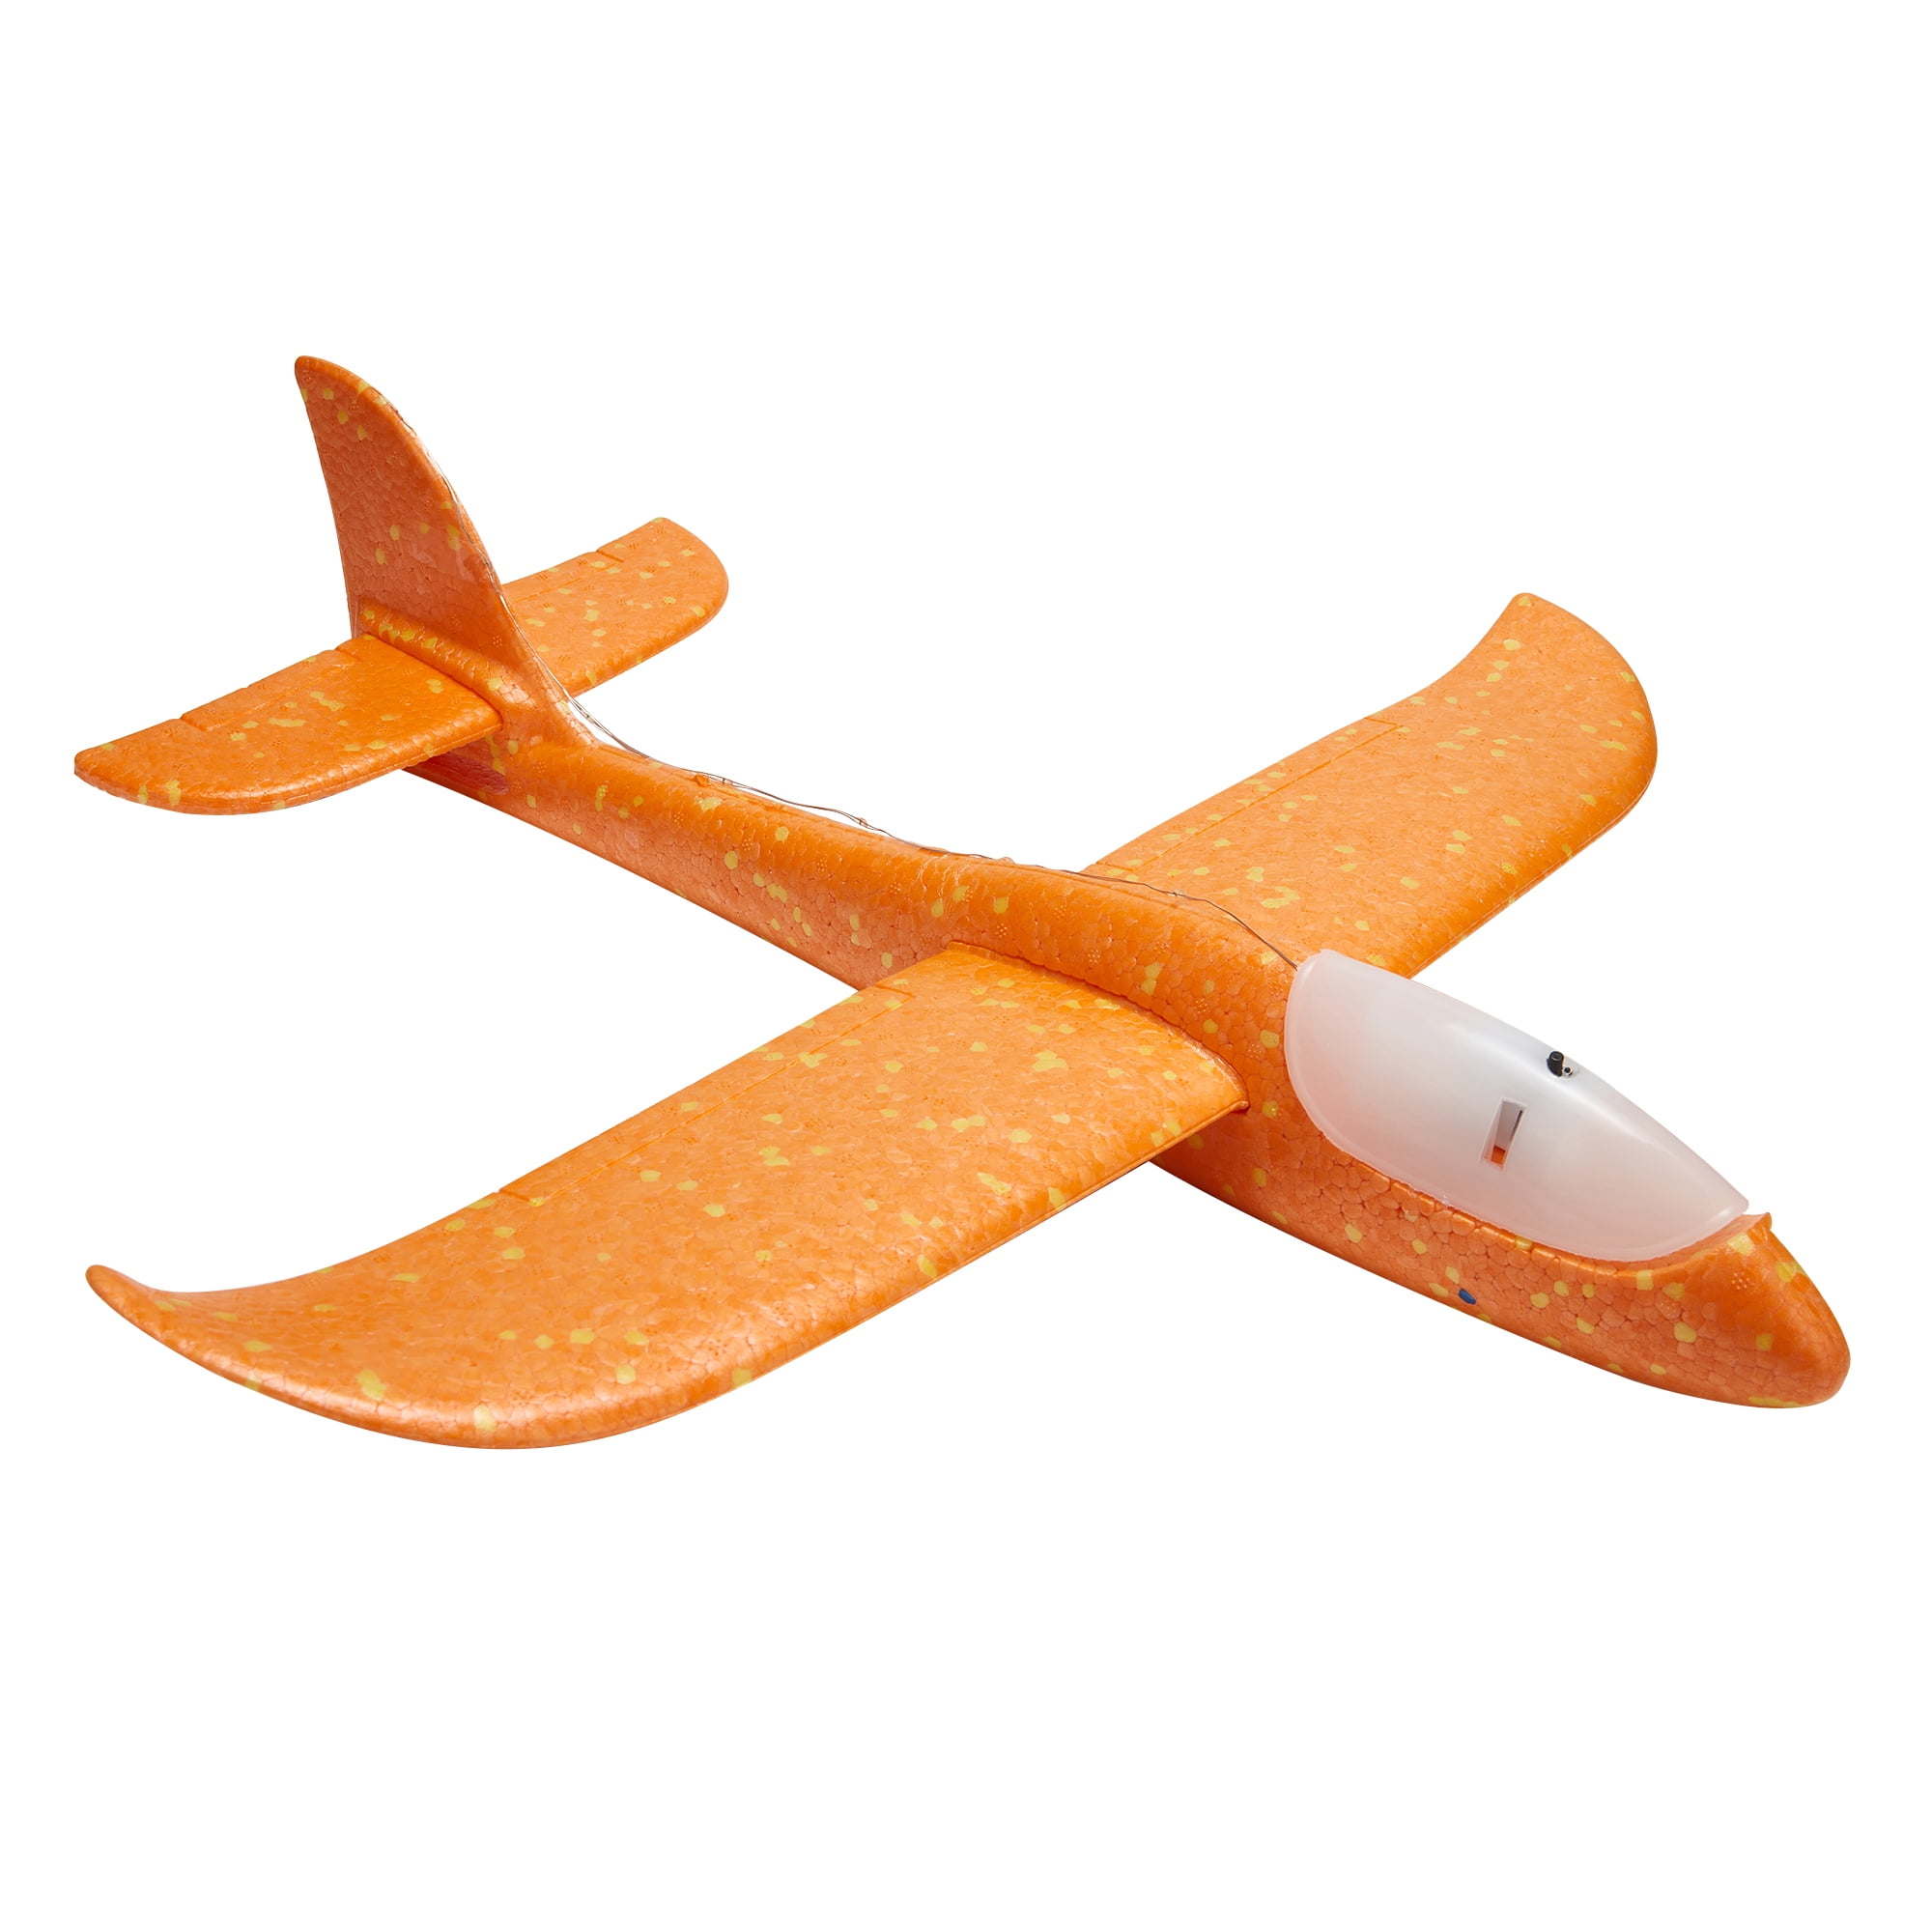 Outdoor Glider Plane Indoor Outdoor Game Set of 48 Windy City Novelties Flying Airplane Toy for Kids 